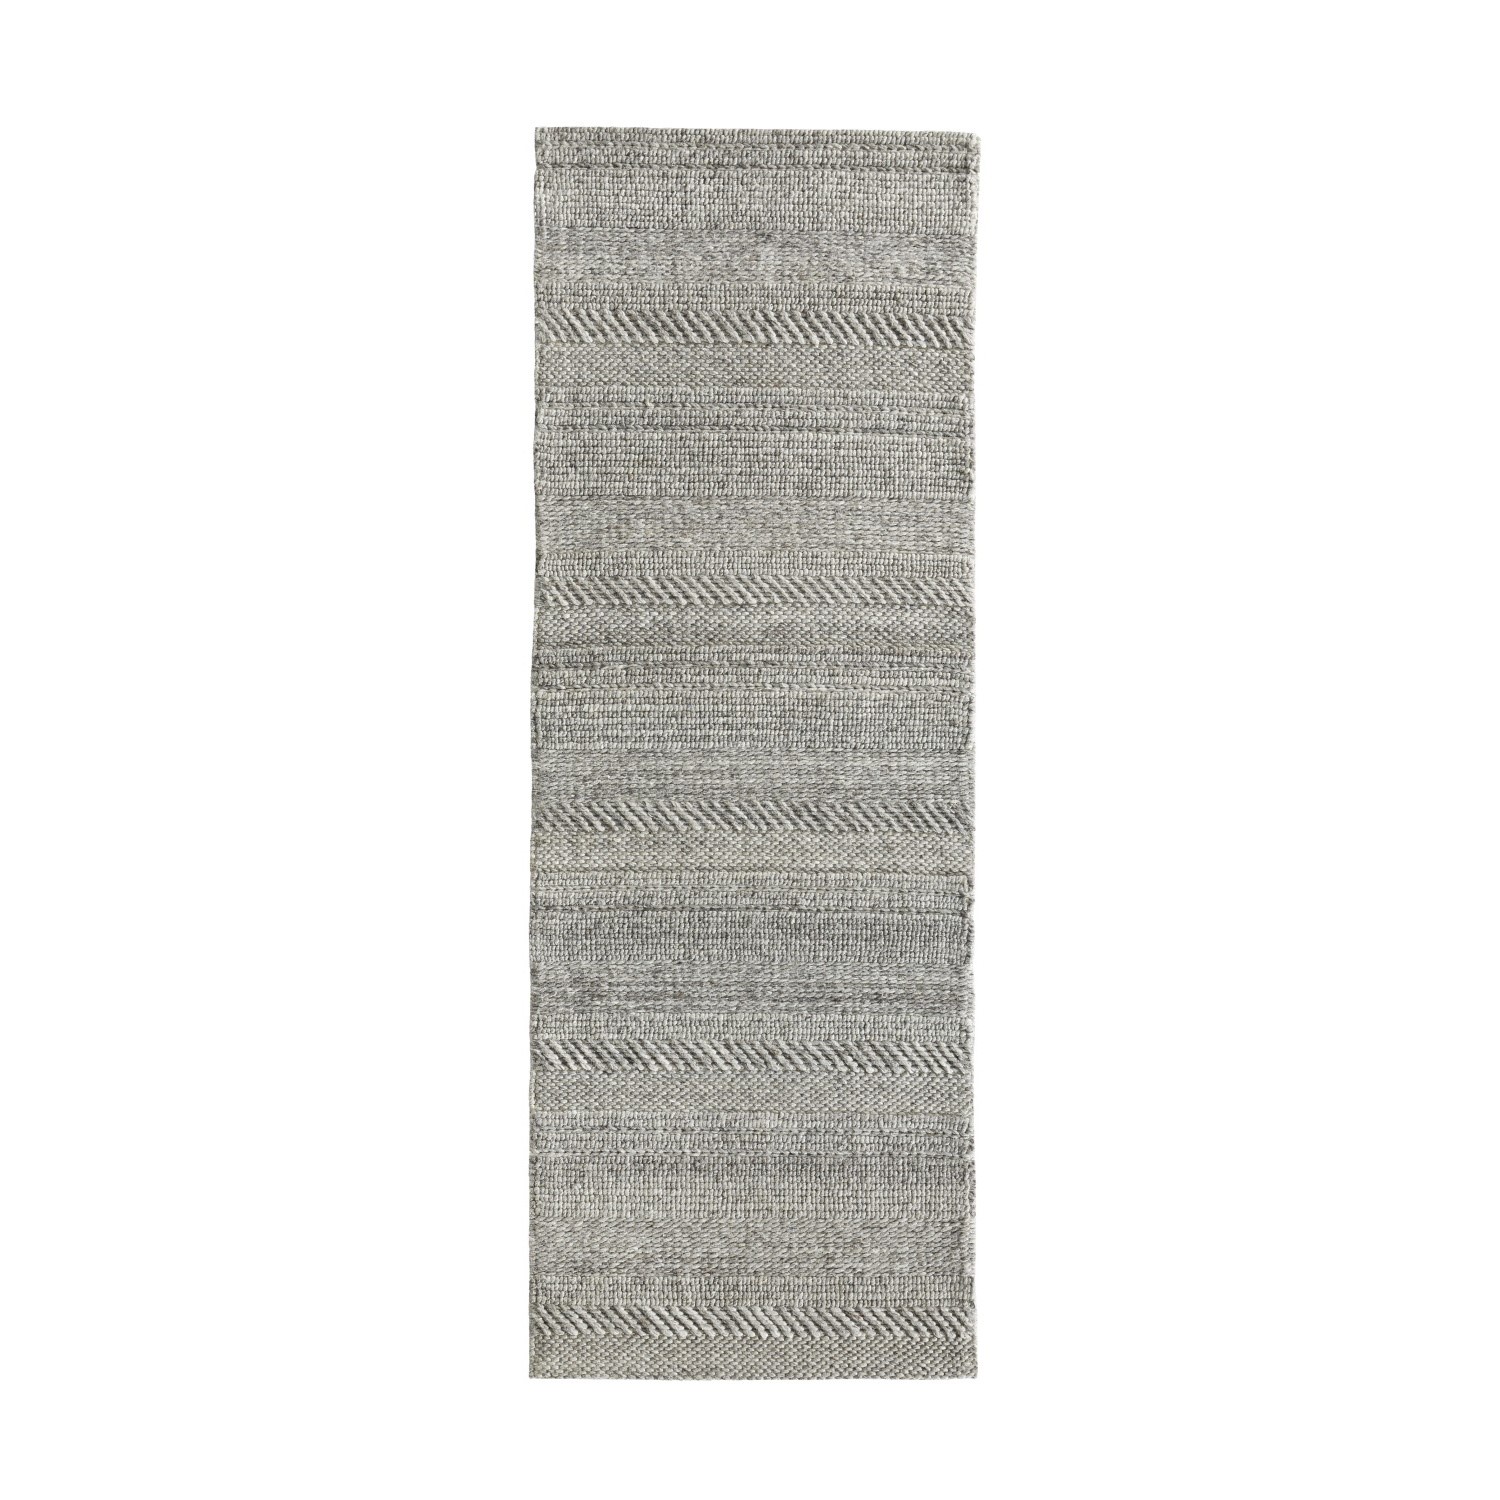 Photo of Chunky knit runner rug in natural grey - 67x200cm - ripley